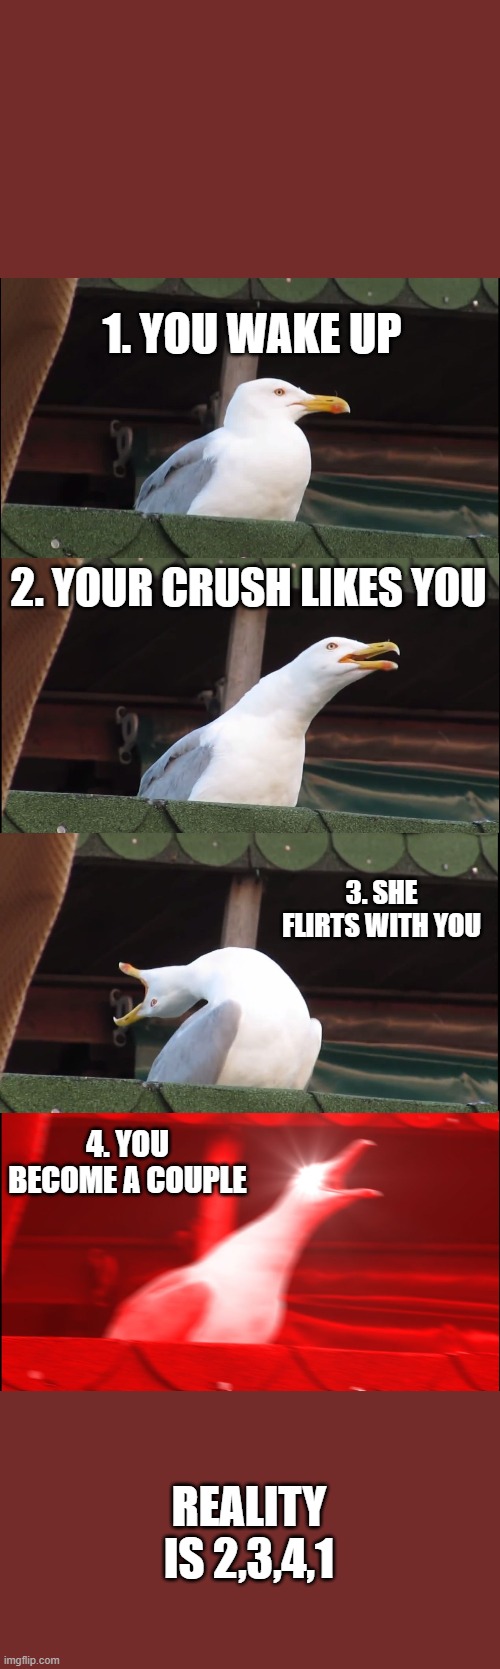 Inhaling Seagull Meme | 1. YOU WAKE UP; 2. YOUR CRUSH LIKES YOU; 3. SHE FLIRTS WITH YOU; 4. YOU BECOME A COUPLE; REALITY IS 2,3,4,1 | image tagged in memes,inhaling seagull | made w/ Imgflip meme maker